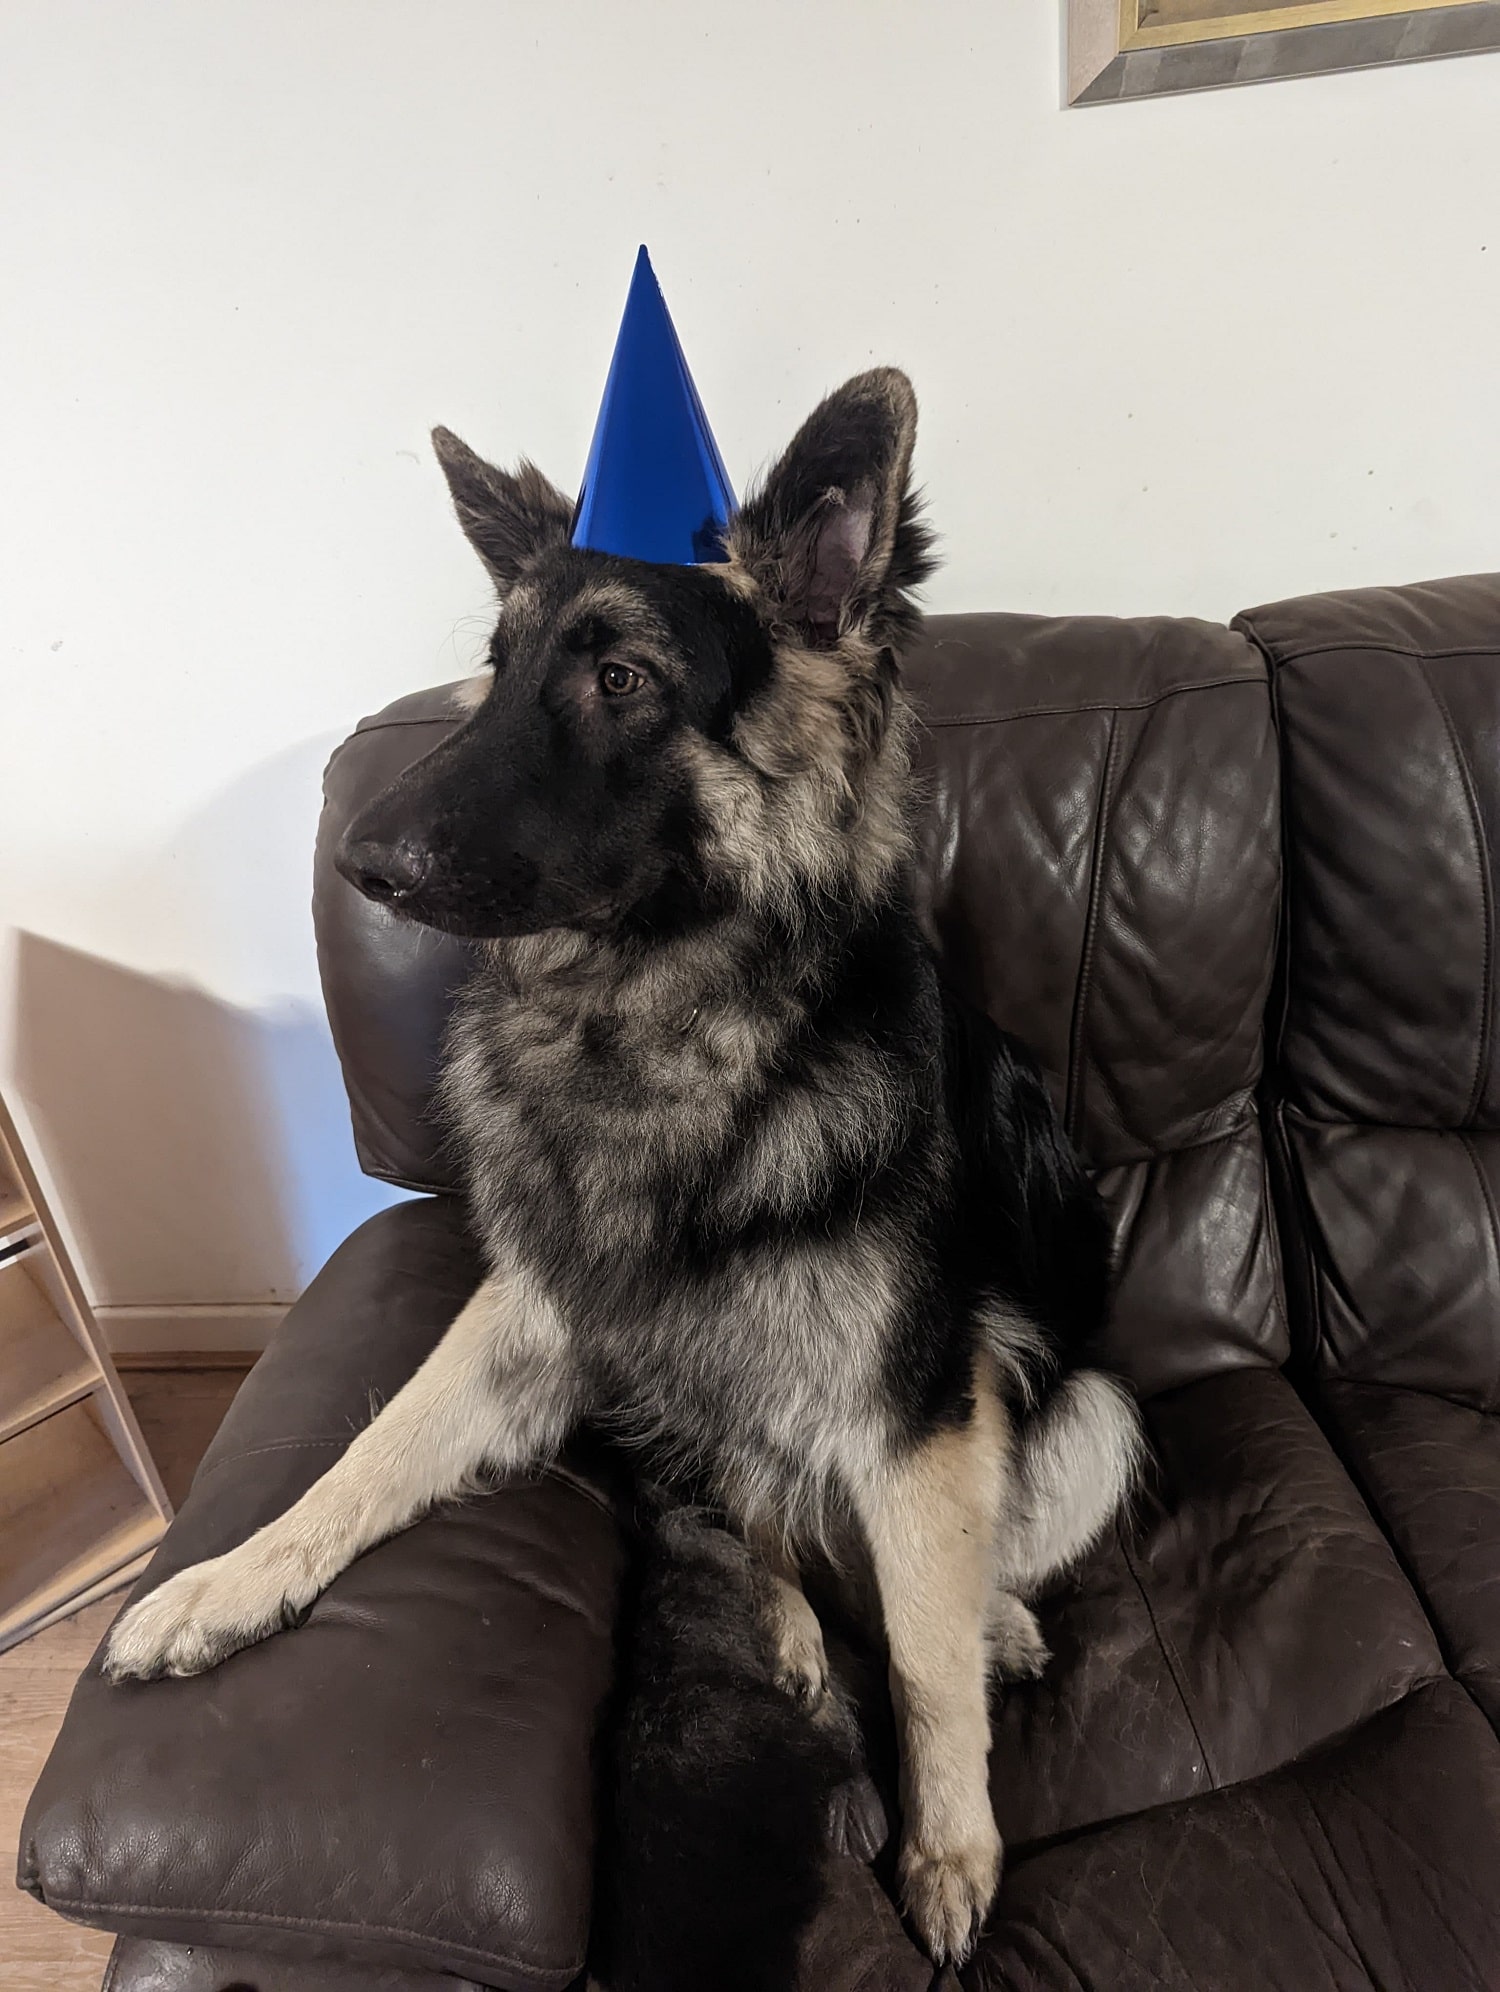 Photo of a dog wearing a blue party hat.